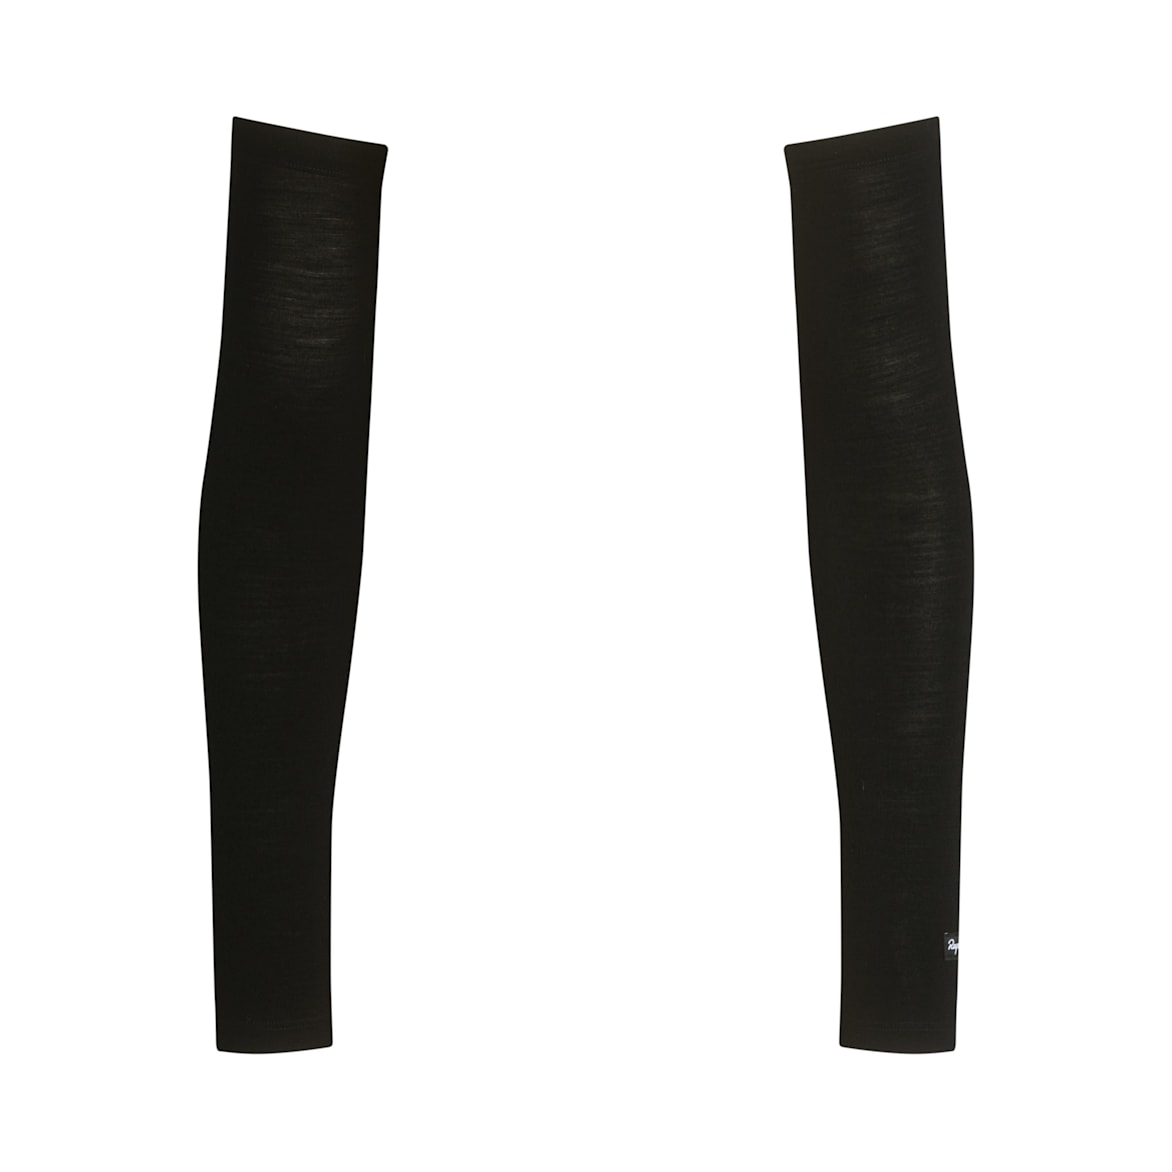 Rapha Thermal Knitted Sports Leg Warmers, Black, S